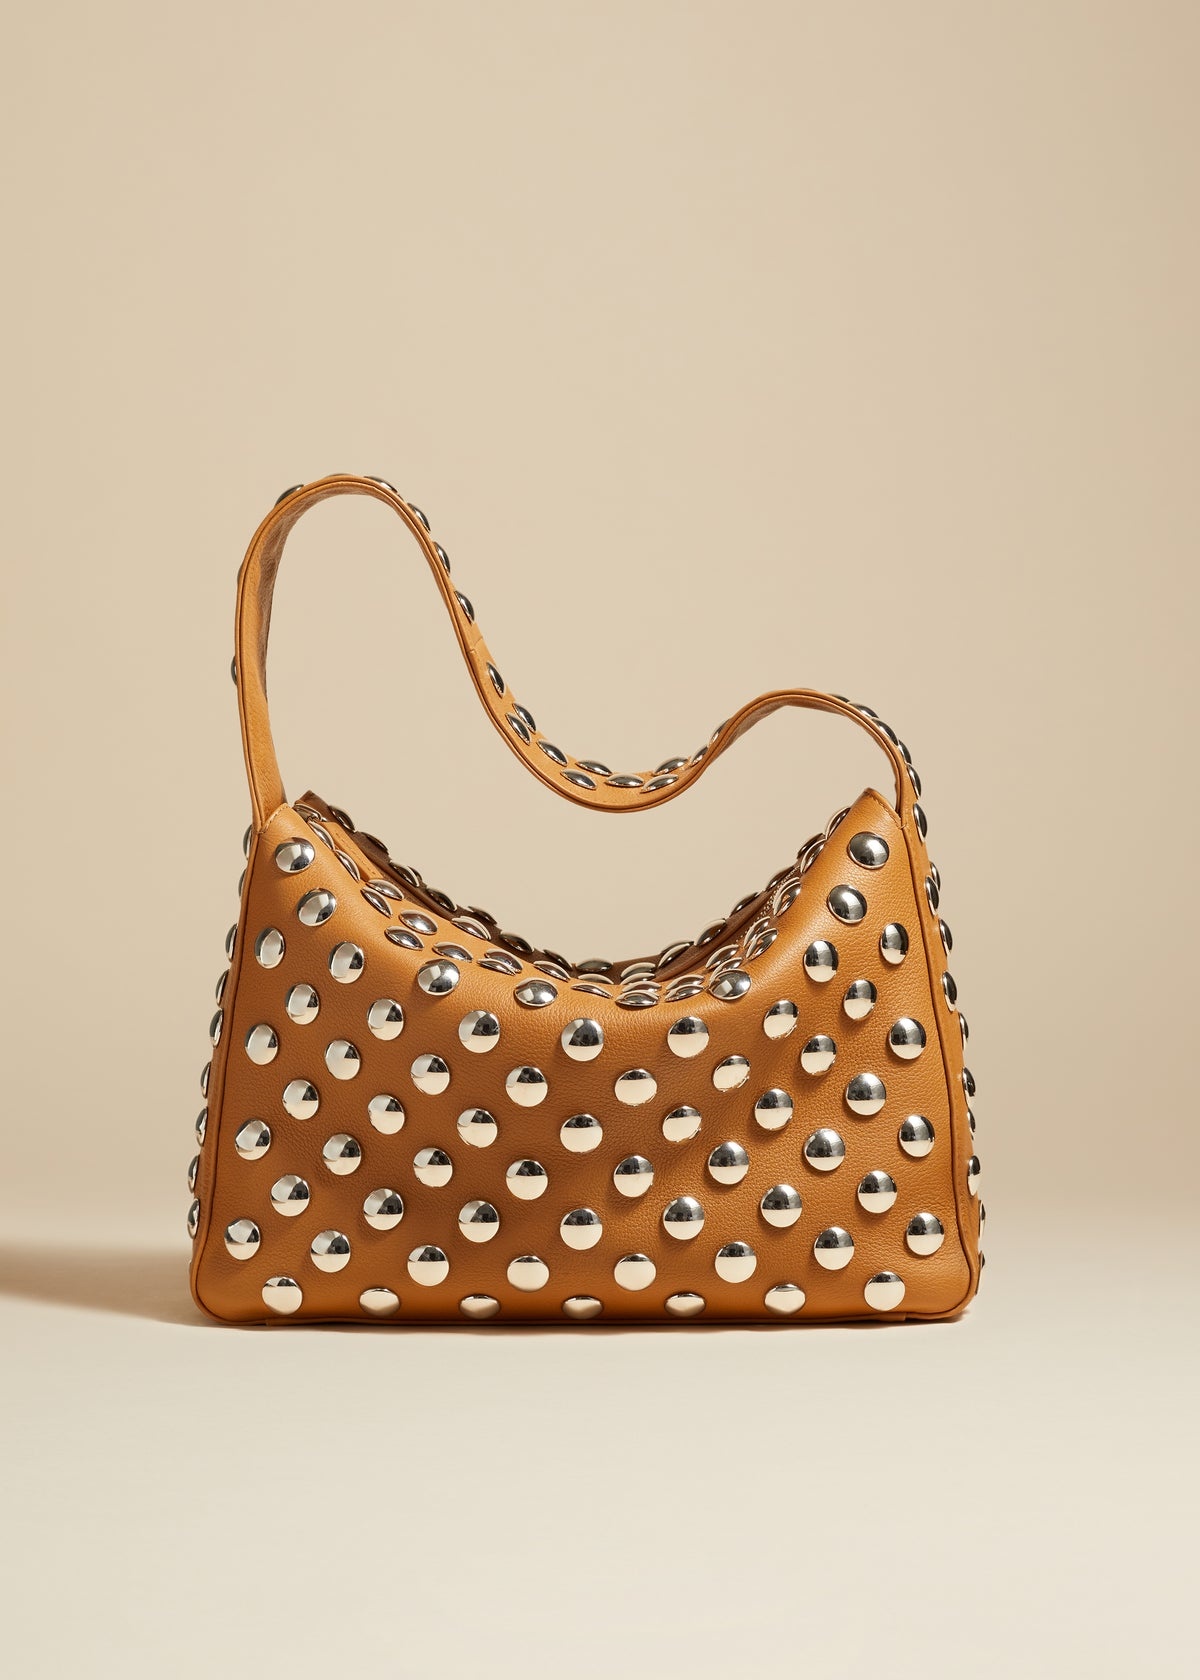 The Elena Bag in Nougat Leather with Studs - 1